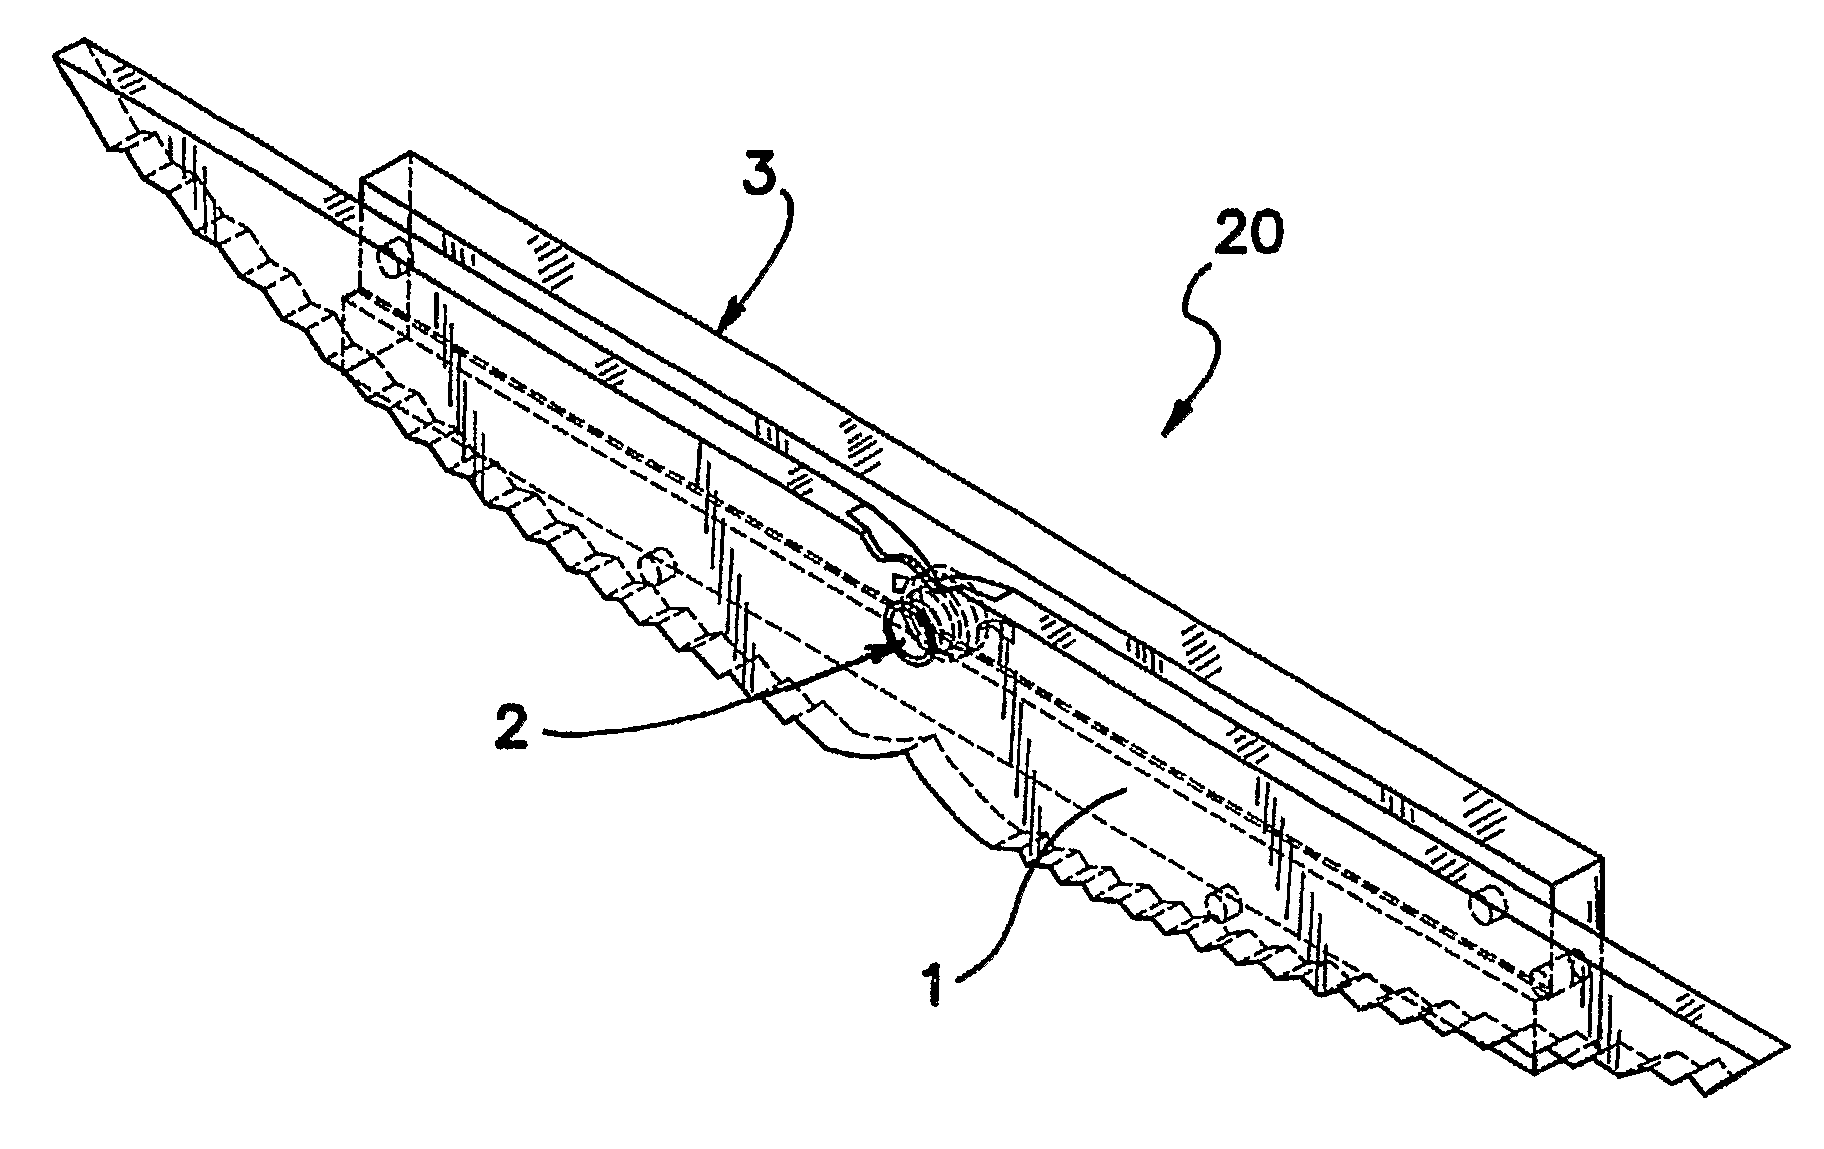 Apparatus And Method Of Using A Led Light Source To Generate An Efficent, Narrow, High-Aspect Ratio Light Pattern